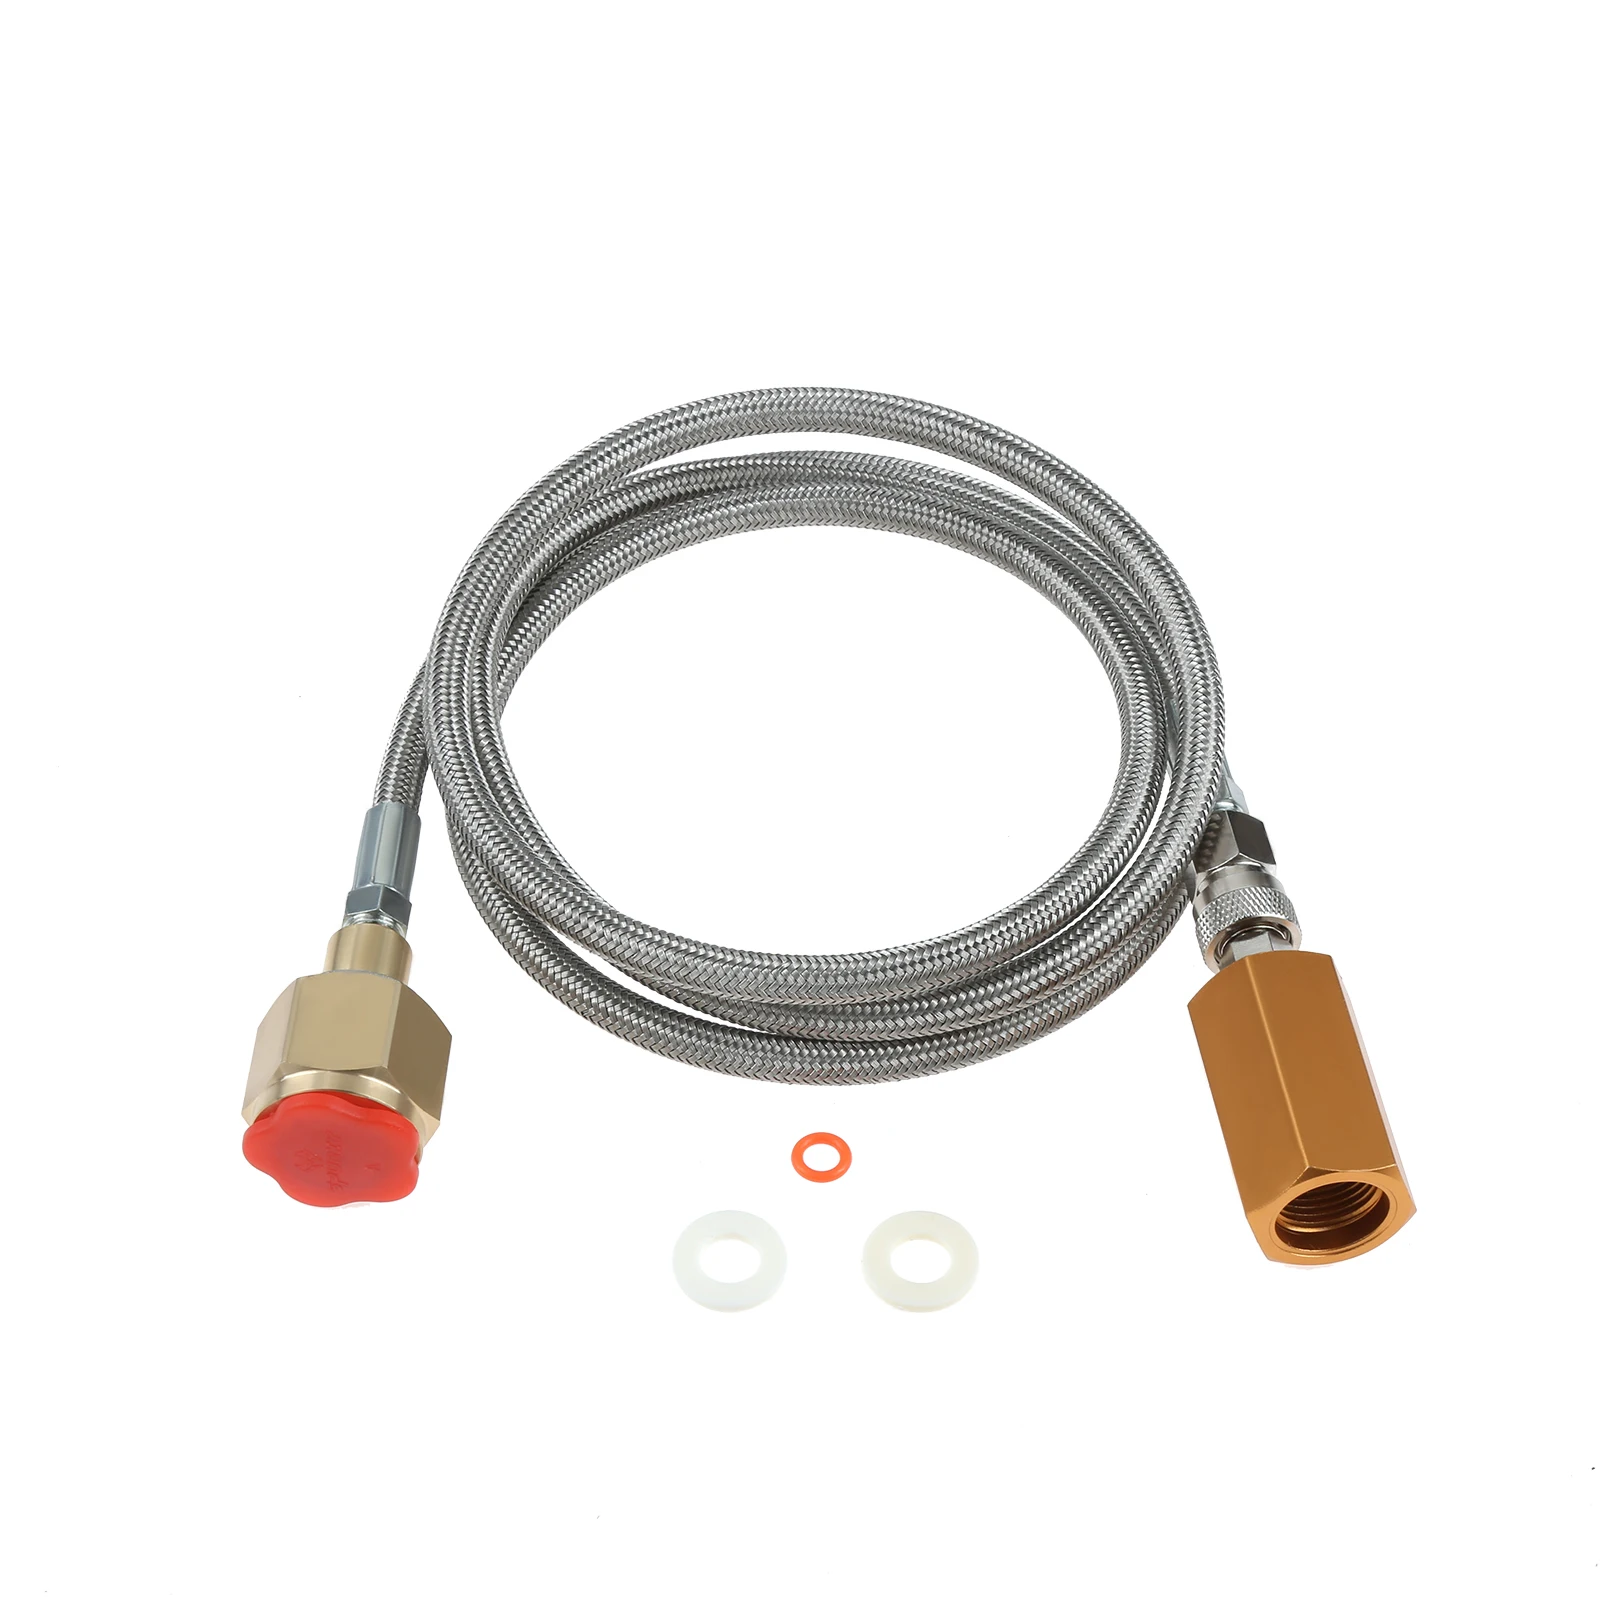 

CO2 Adapter 60In Stainless Steel Braided Hose with Gasket CGA320 to M18*1.5 Connect for Soda Water Maker CO2 Cylinder Large Tank